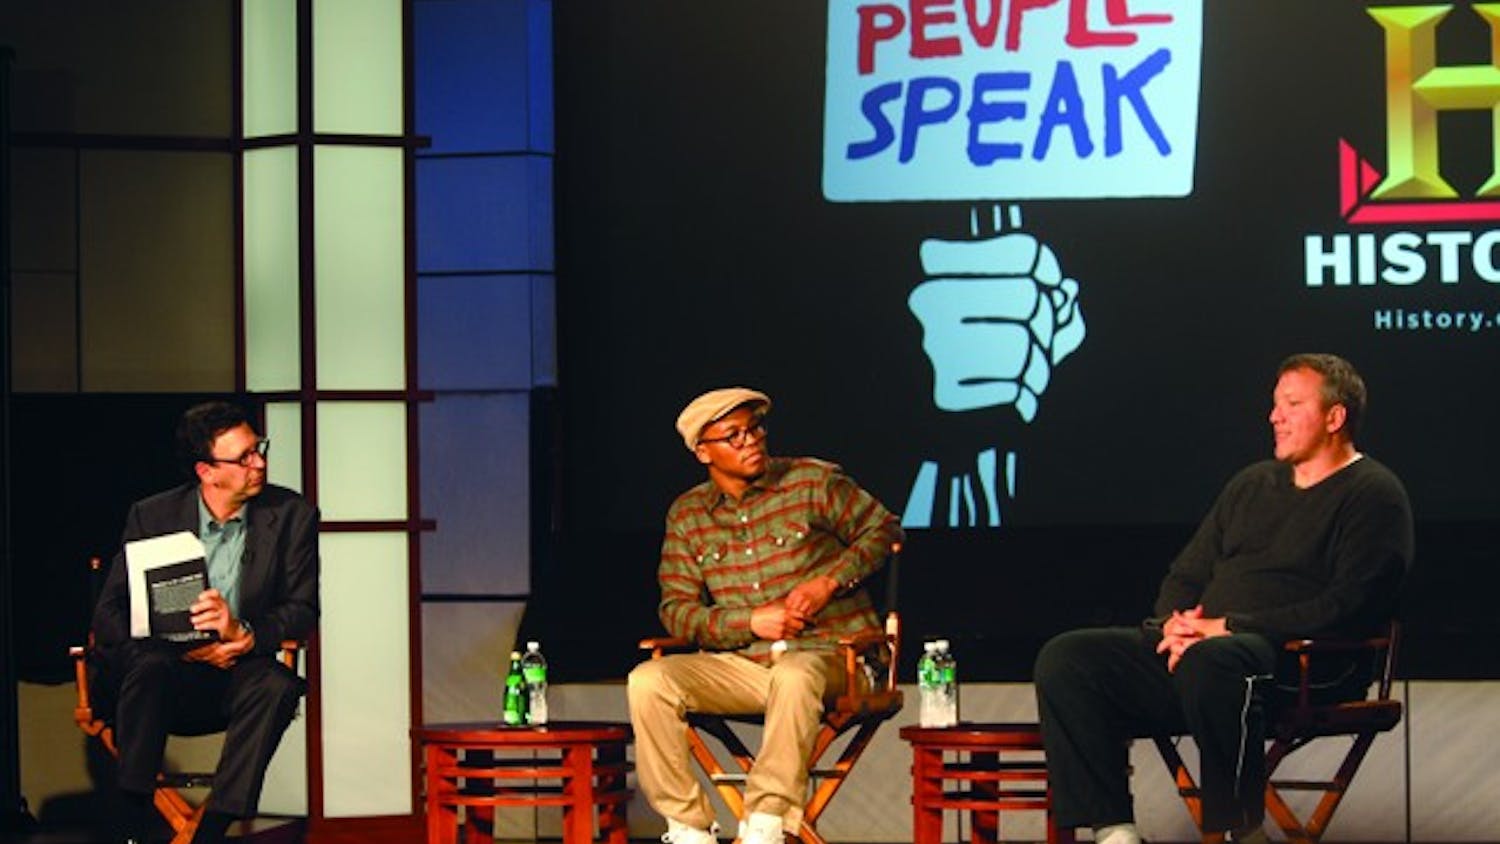 SPEAK OUT â€” On Nov. 9, Lupe Fiasco joined executive producer Chris Moore and author and producer Howard Zinn to discuss a new documentary, â€œThe People Speak.â€ The film, which will air Dec. 13 on the History Channel, features footage of readings by Americans who shaped America. 